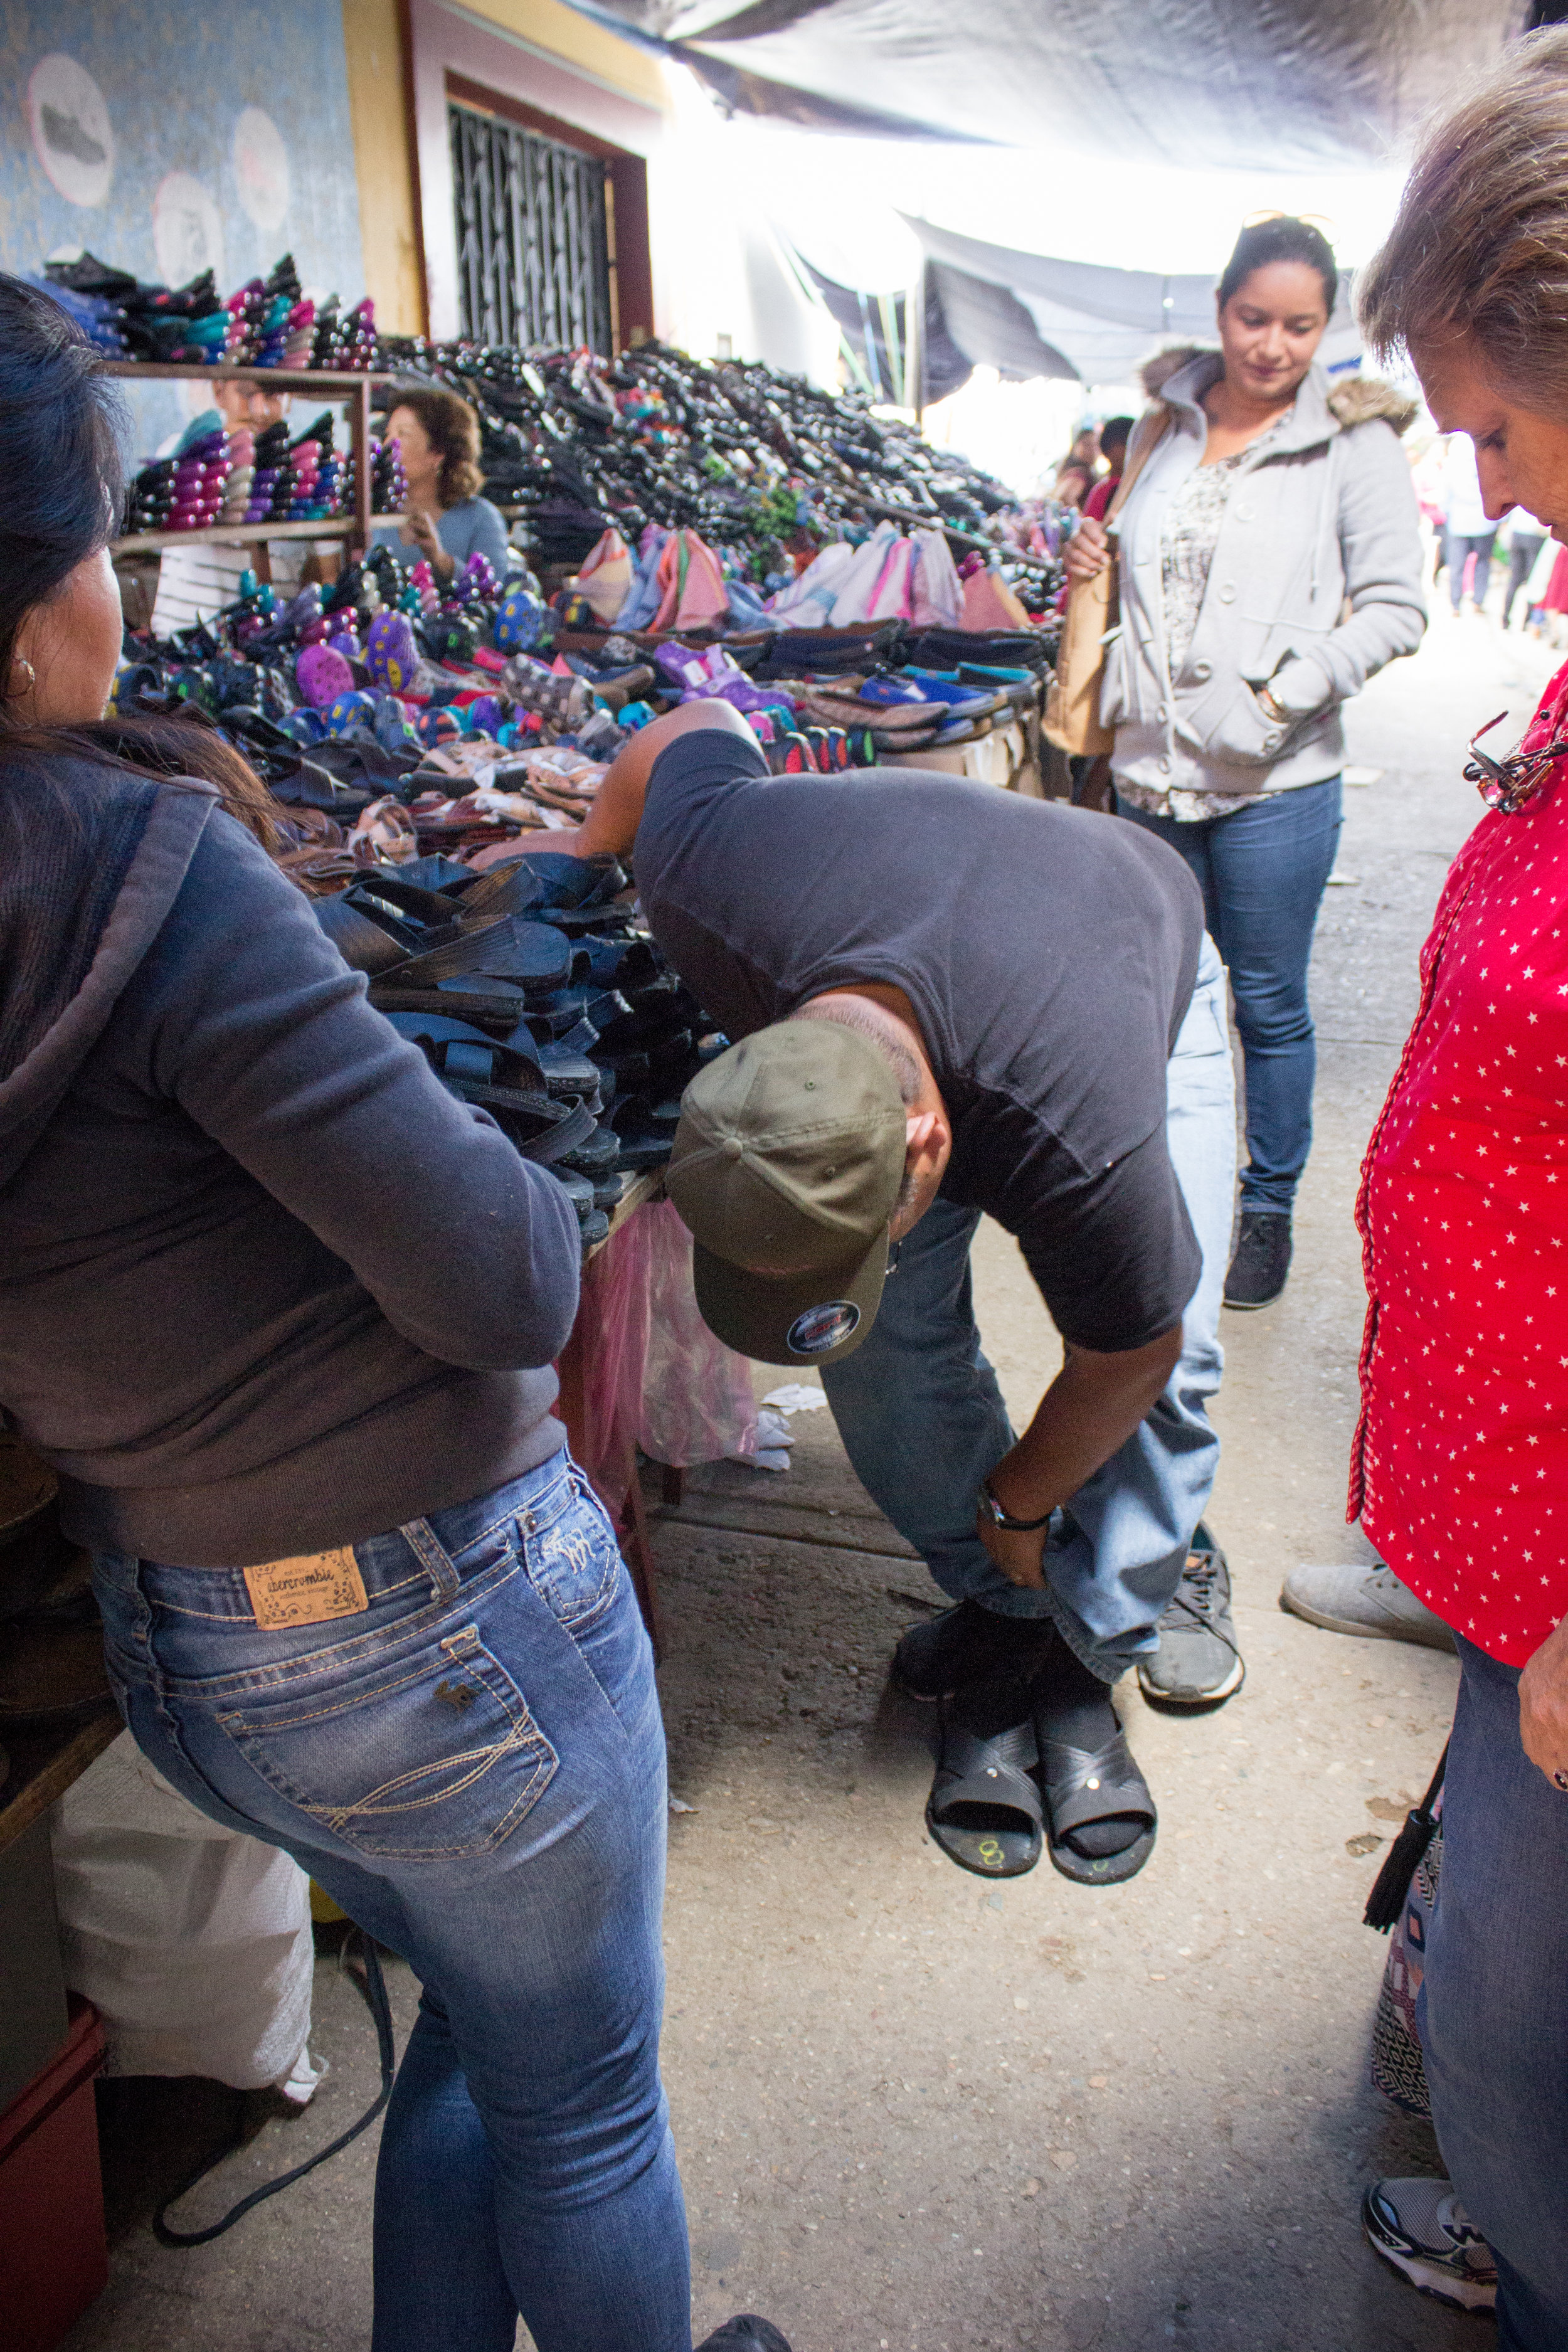  On June 27, Ilene, Junior, Maria, Manuel and I traveled to another part of Oaxaca. Here, Junior tries shoes on in a market where we stopped along the way. 